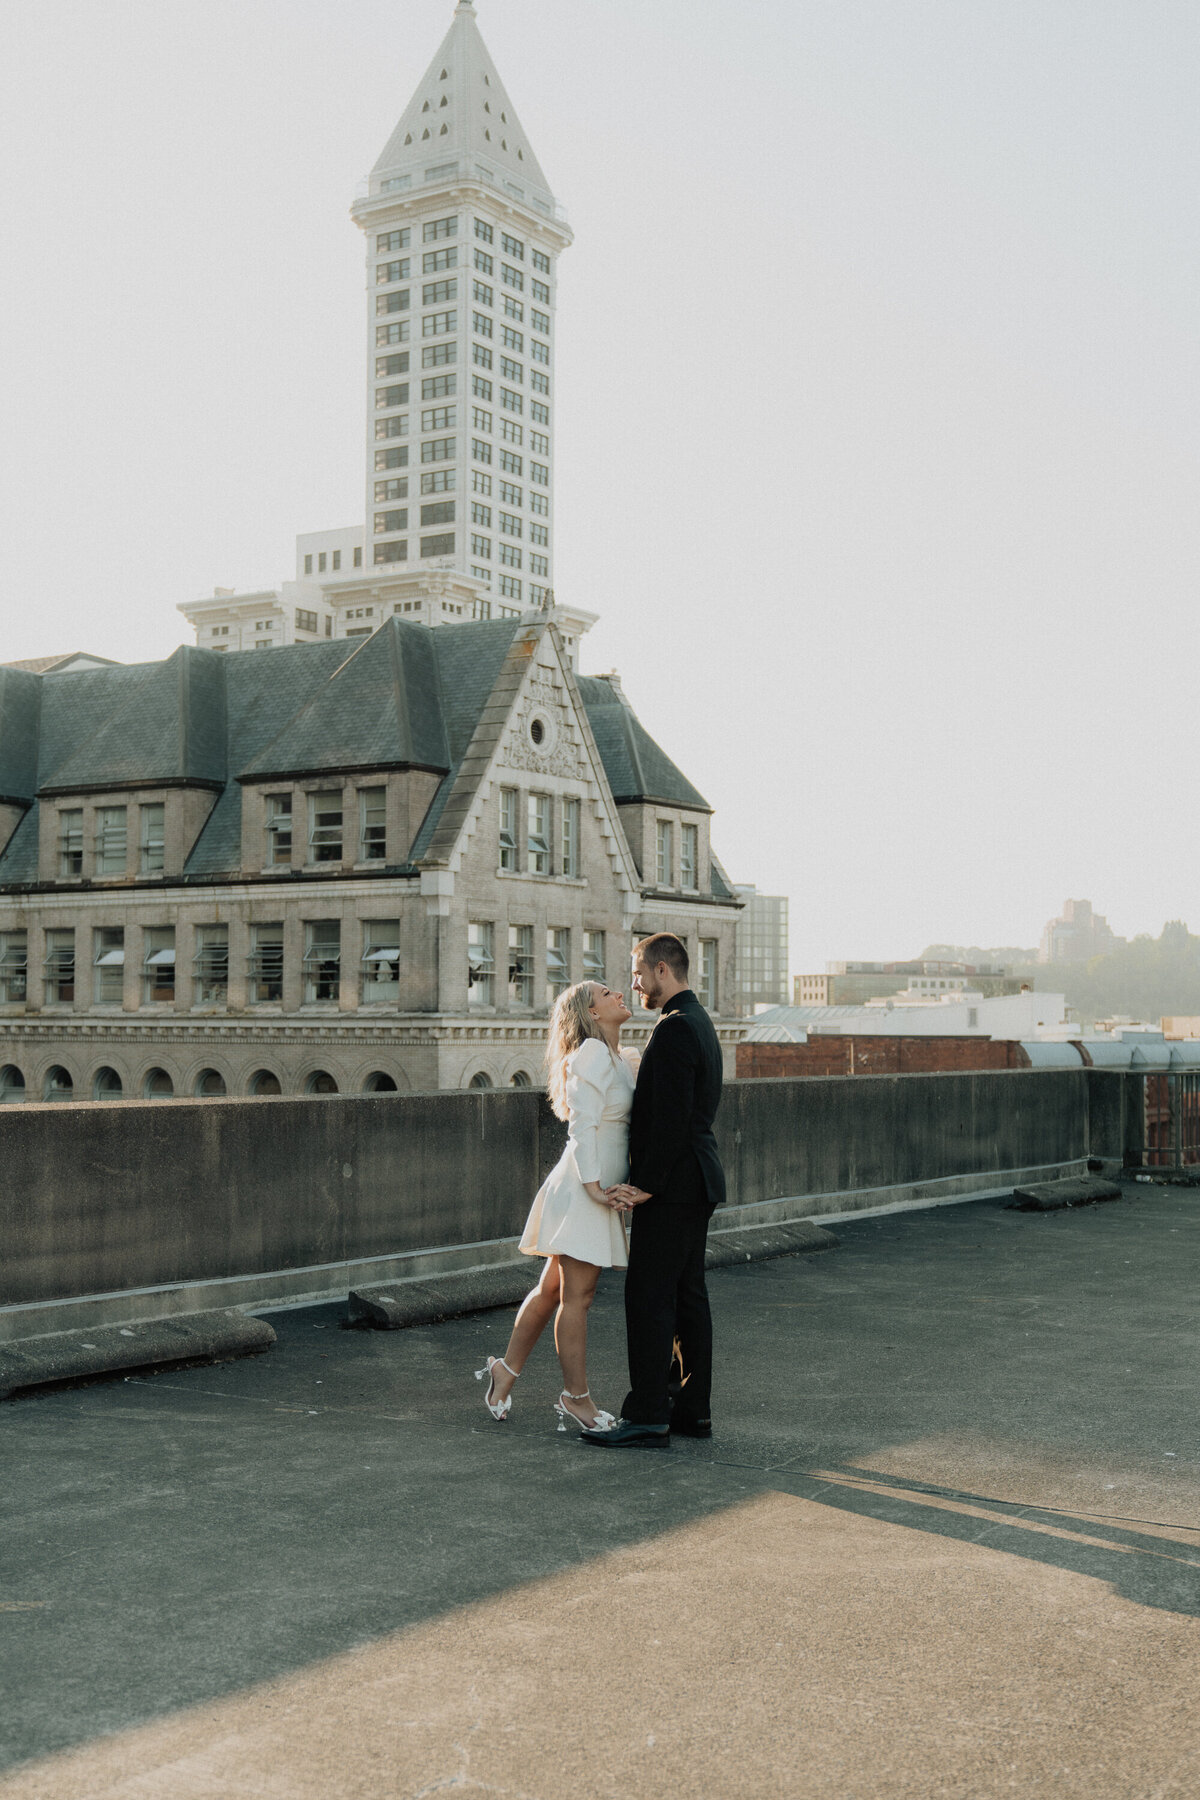 Sara-Canon-Elopement-Downtown-Seattle-WA-Amy-Law-Photography-1